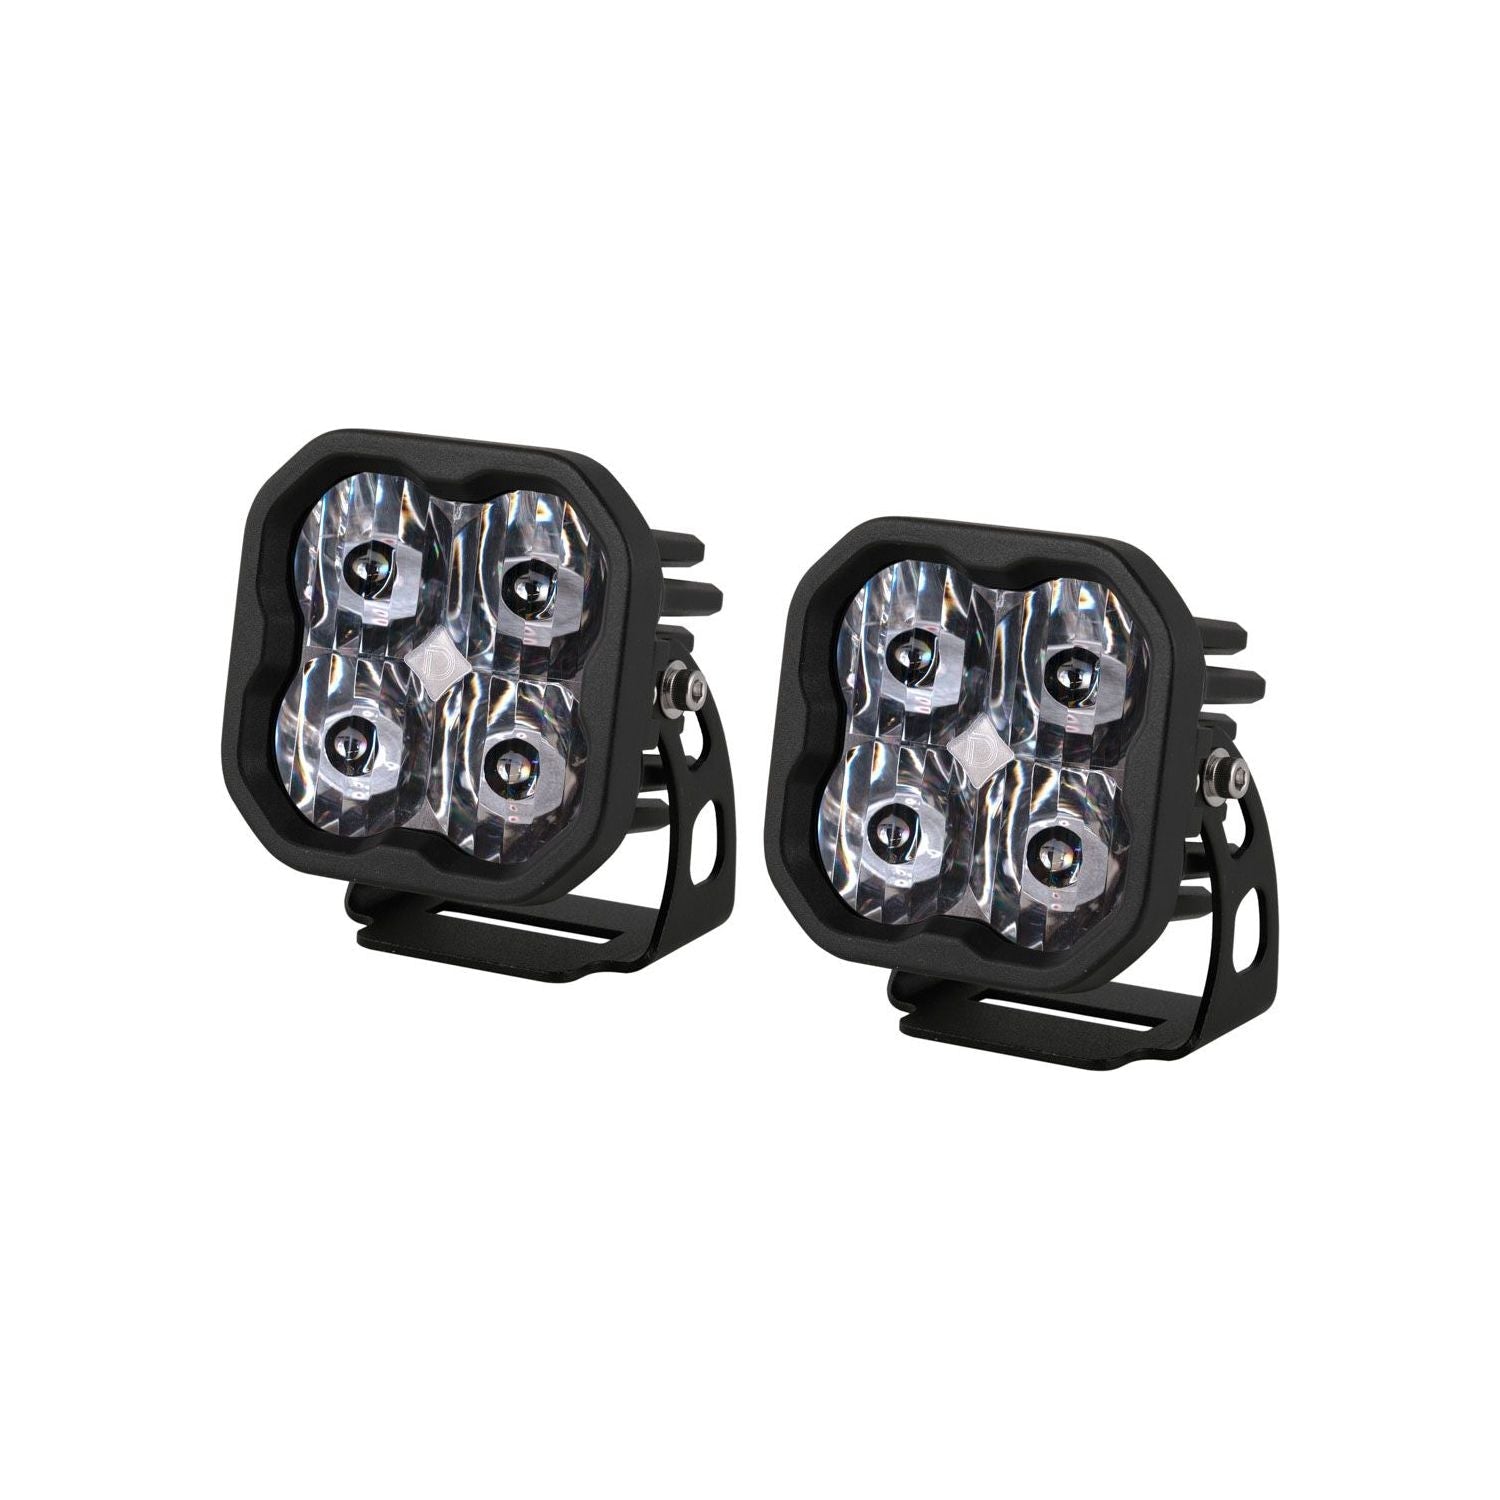 Stage Series 3" White Sport LED Pods (Pair)